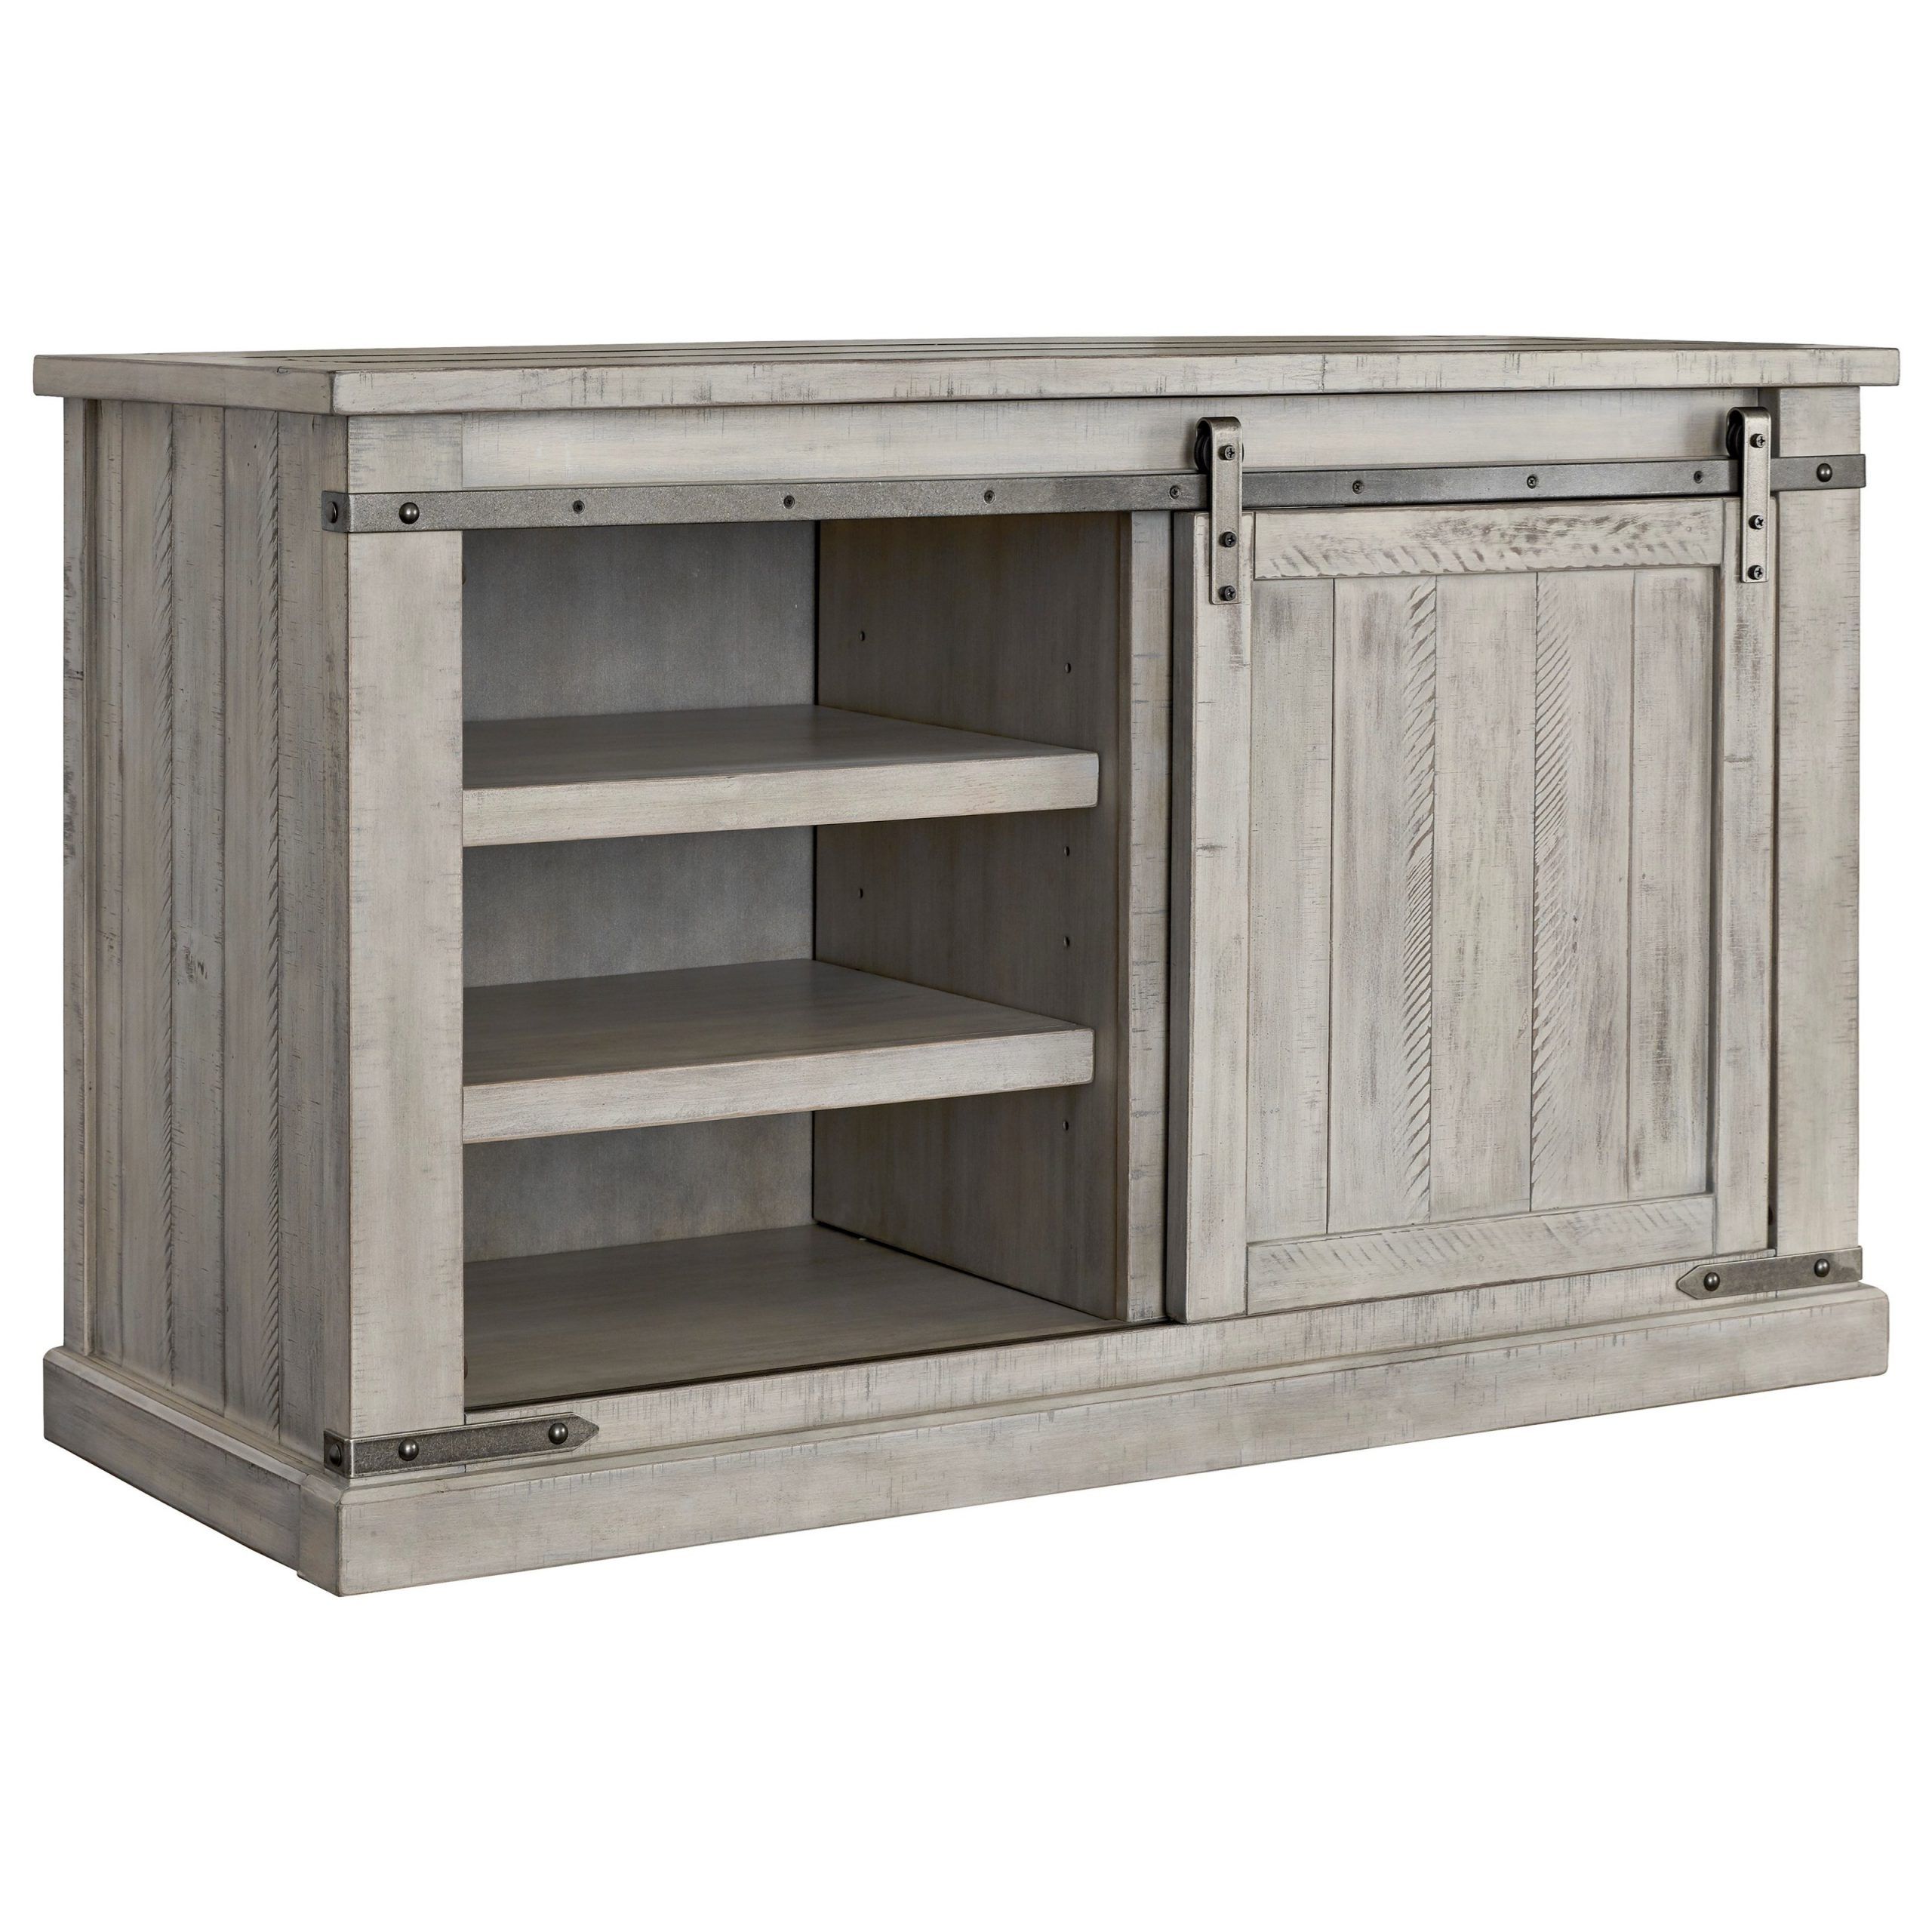 Styleline Carynhurst W755 28 Rustic White Medium Tv Stand Pertaining To Tv Stands With Table Storage Cabinet In Rustic Gray Wash (View 11 of 15)